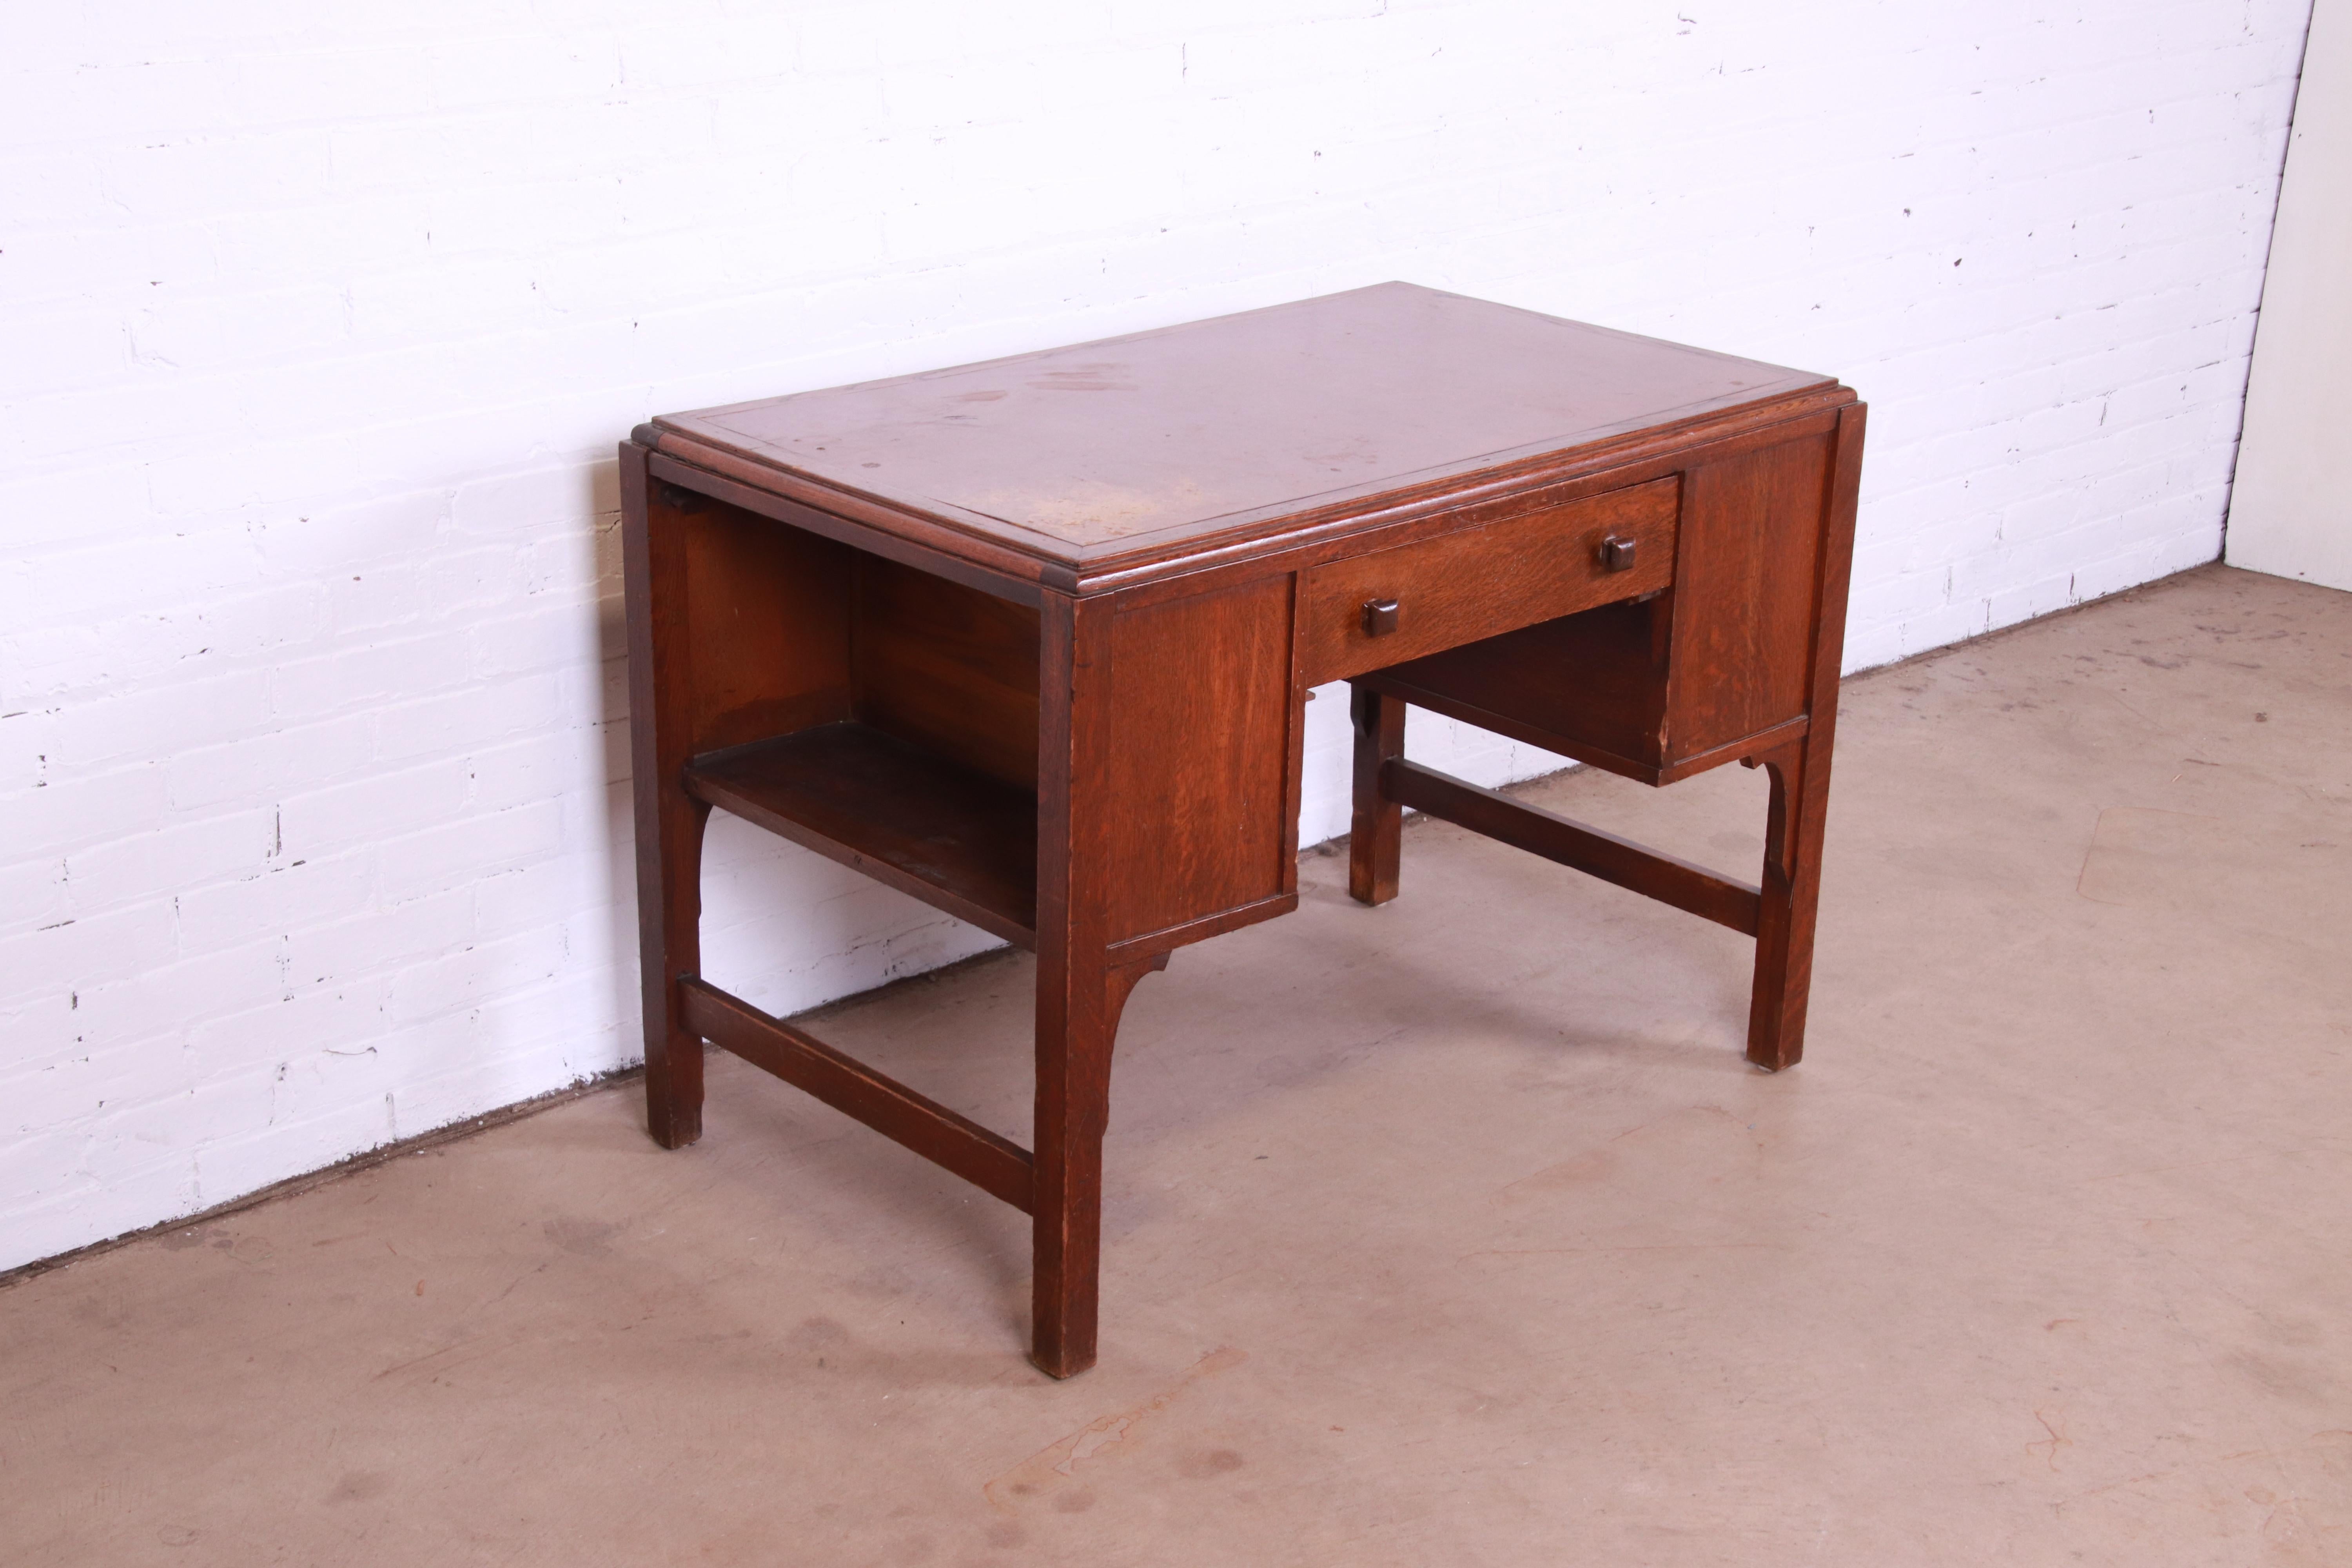 Antique Arts & Crafts Oak Writing Desk From Frank Lloyd Wright's DeRhodes House In Good Condition For Sale In South Bend, IN